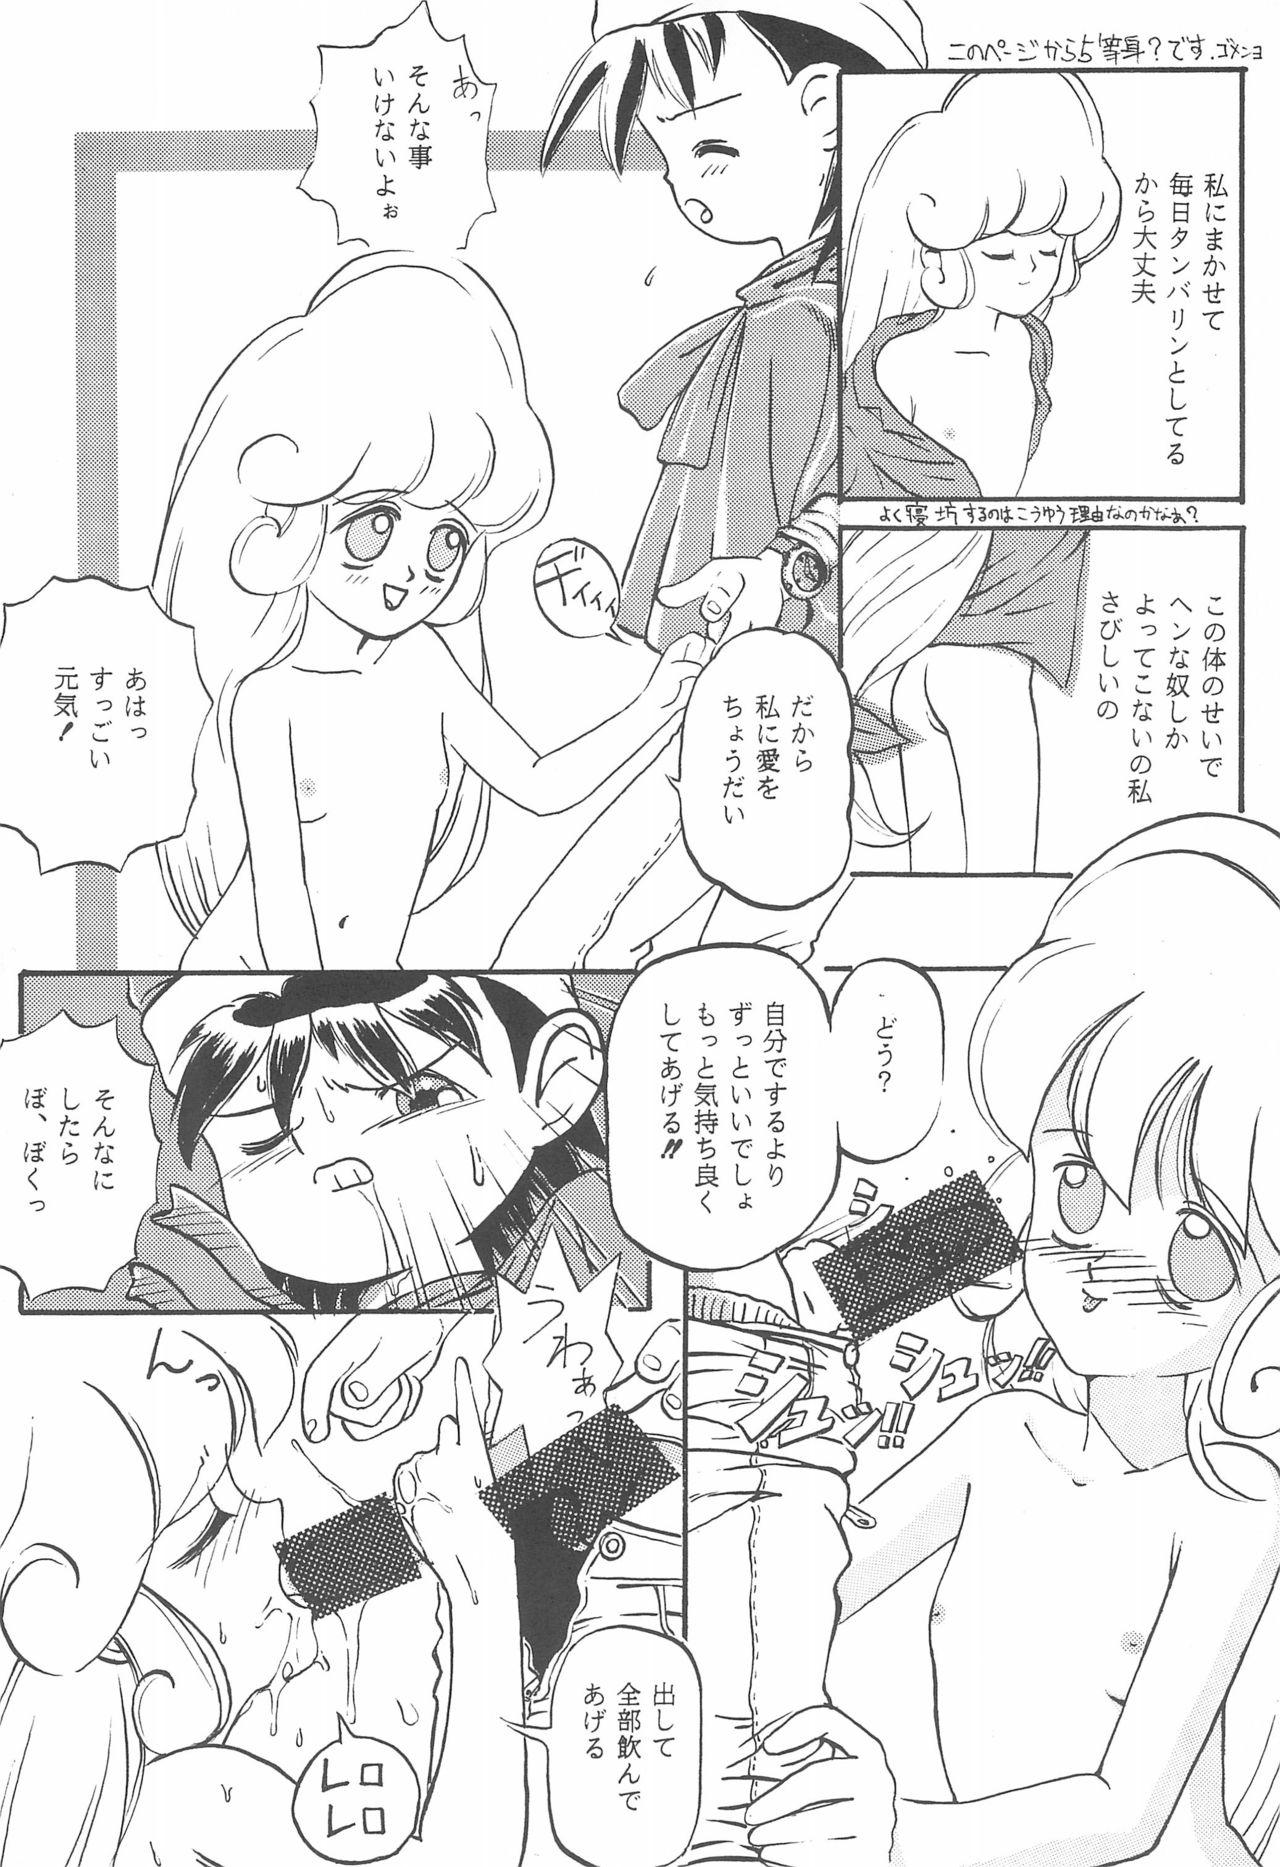 Girls STAMEN - Floral magician mary bell Negao - Page 10